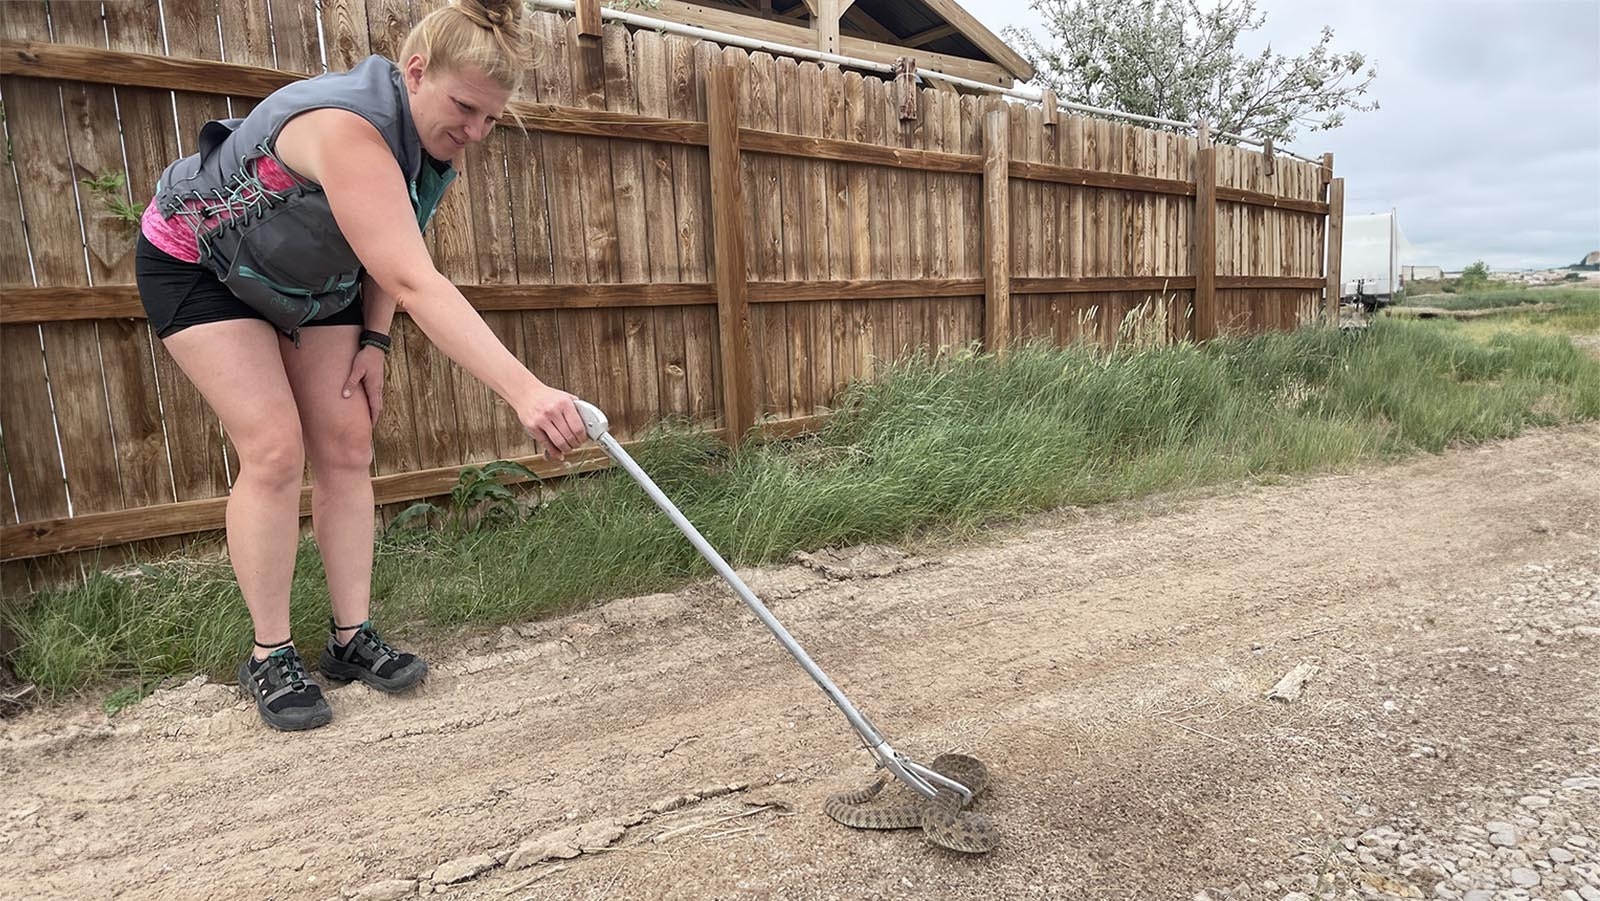 Ashlea Roberts uses a tool to keep her distance while wrangling a rattlesnake.